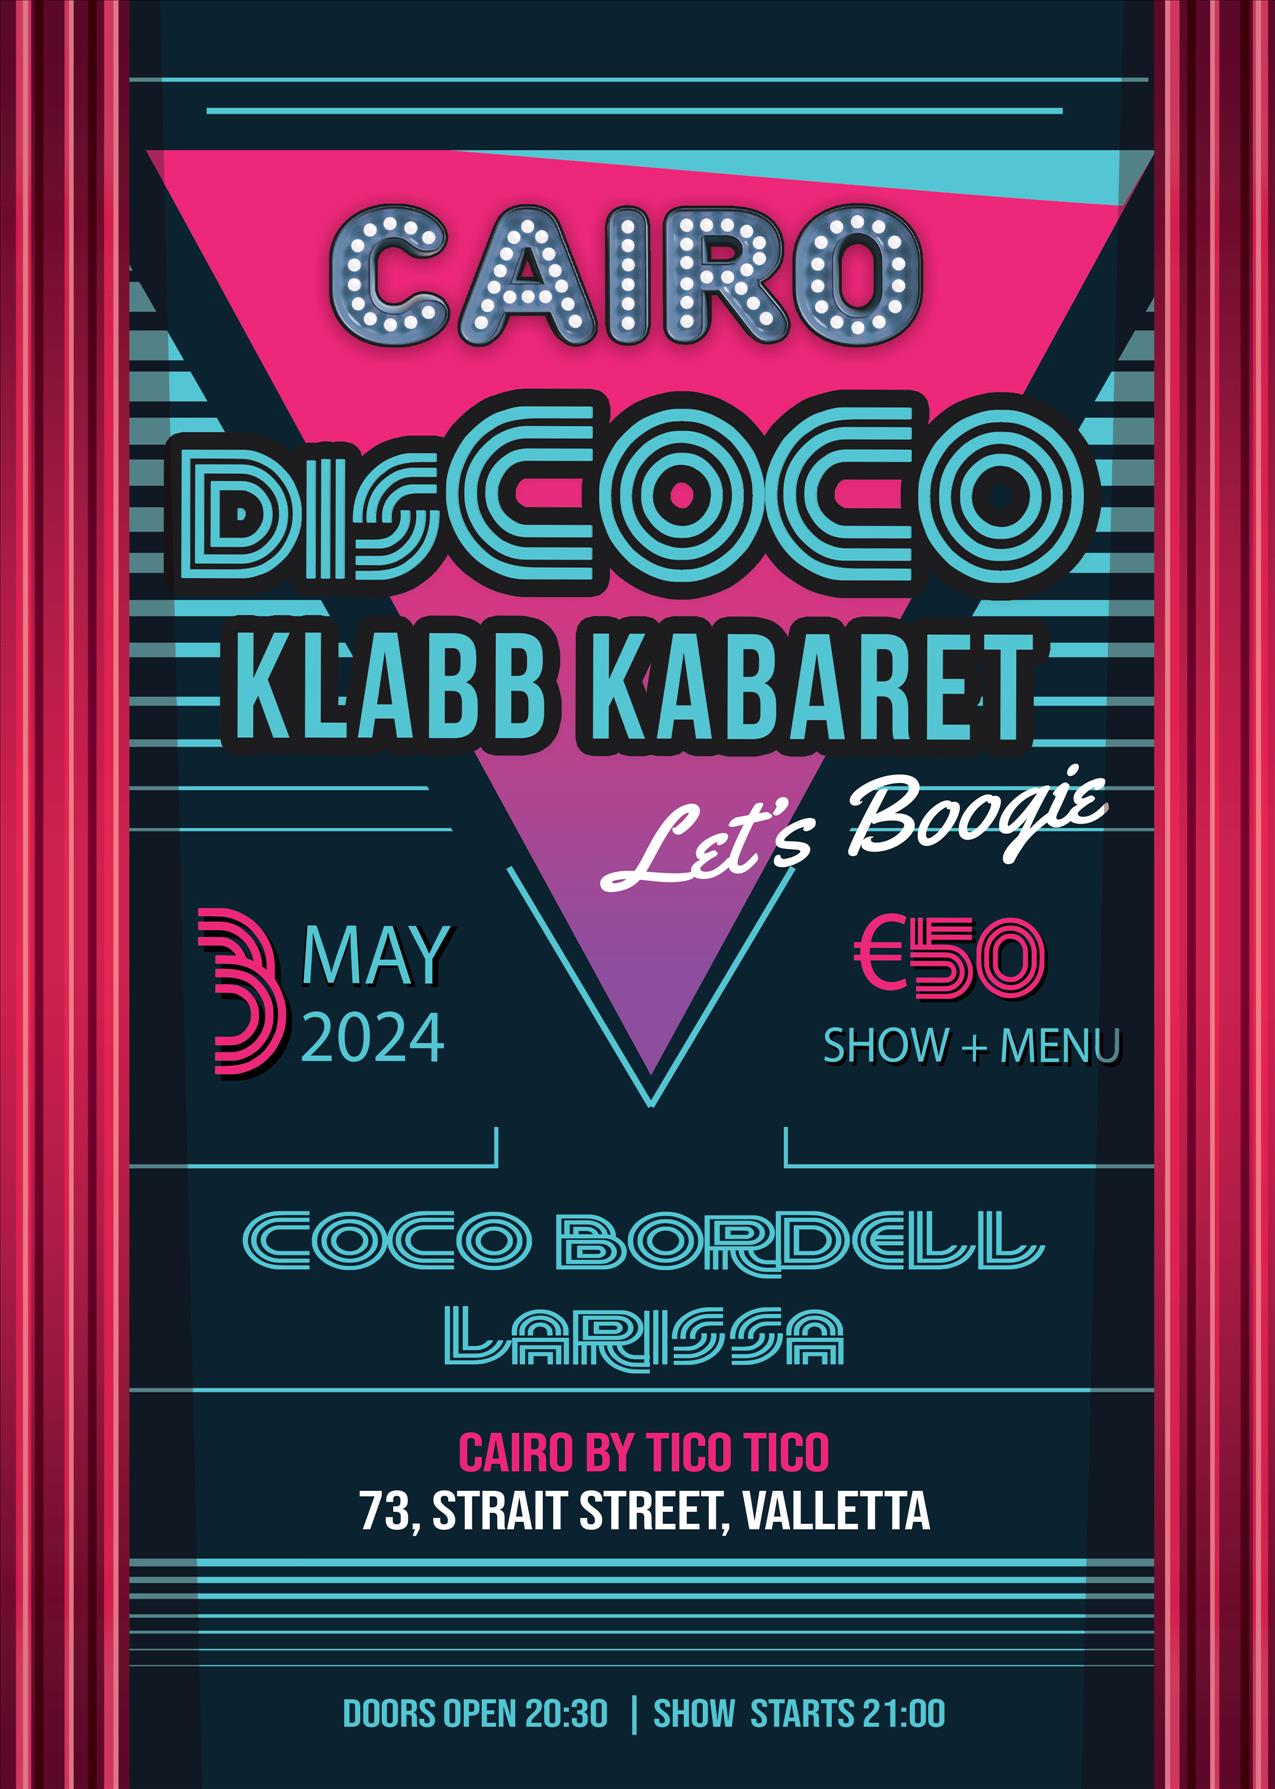 disCoco’s Klabb Kabaret - Let's Boogie at Cairo by Tico Tico